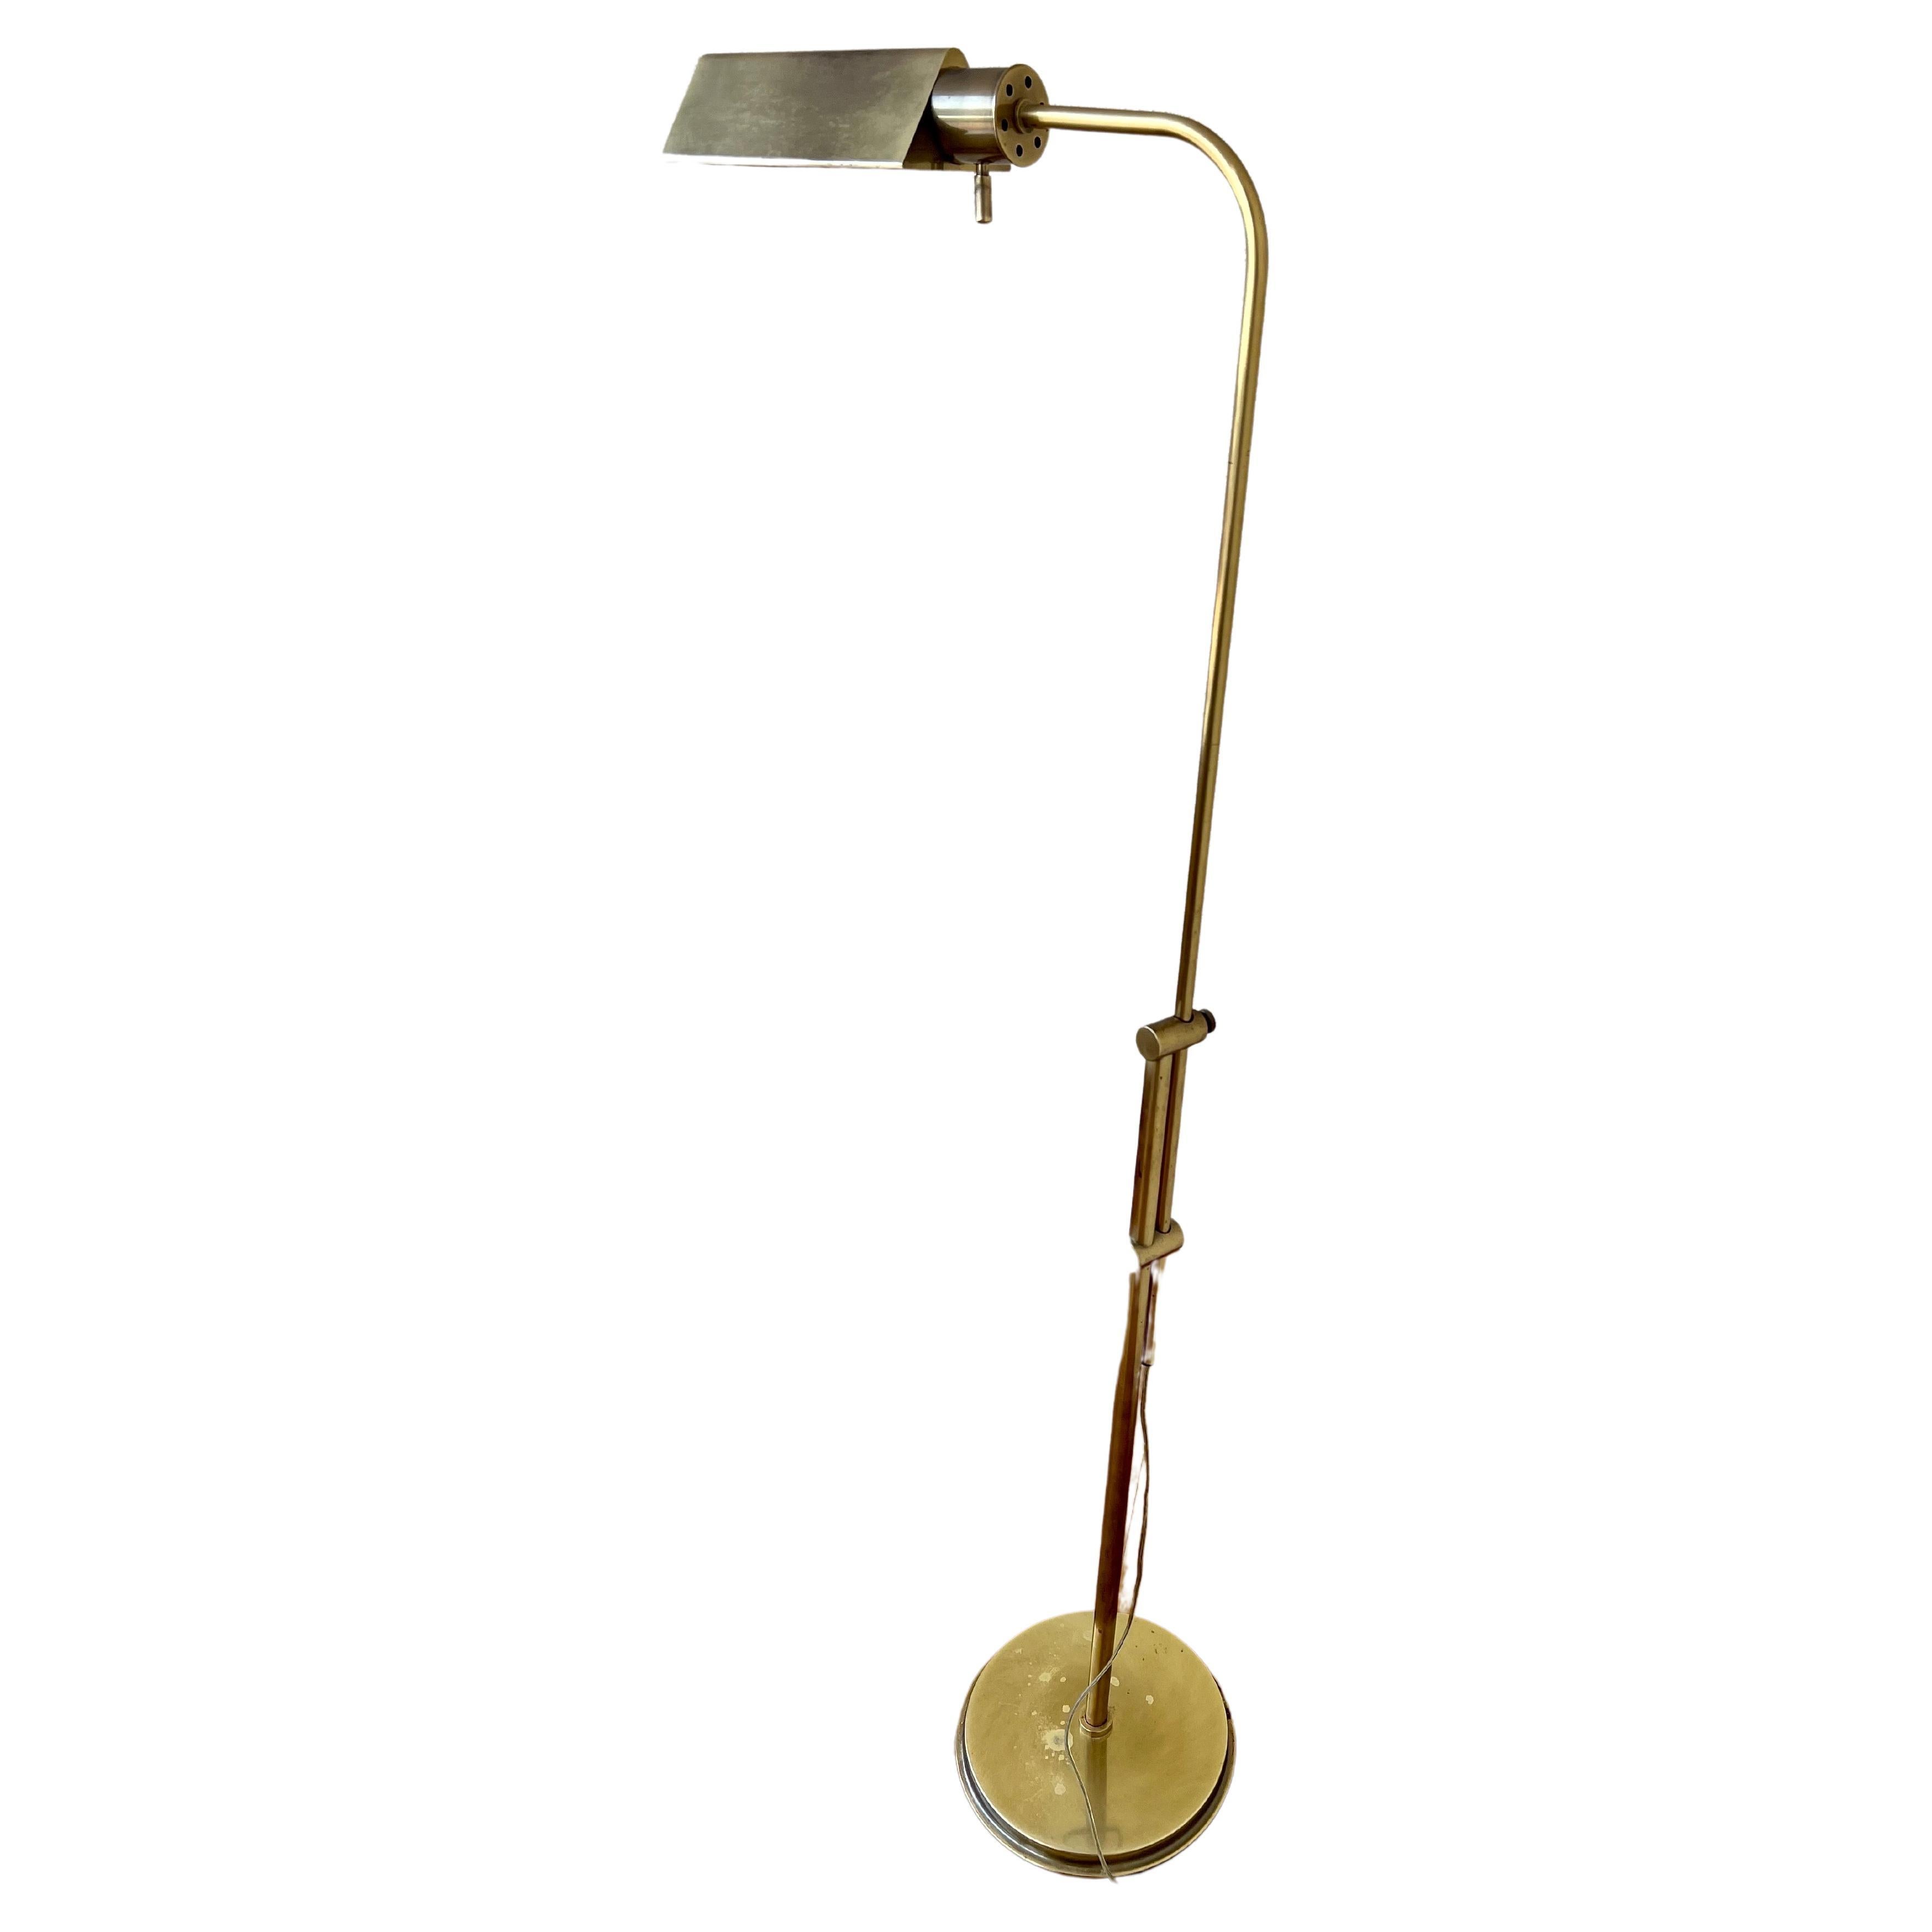 A very nice polished brass multi-directional pharmacy floor lamp by Frederick Cooper, circa 1970s. The lamp is multi-directional it goes up and down and rotates to a 360 degree and is in good working condition. with a dimmer switch The lamp can